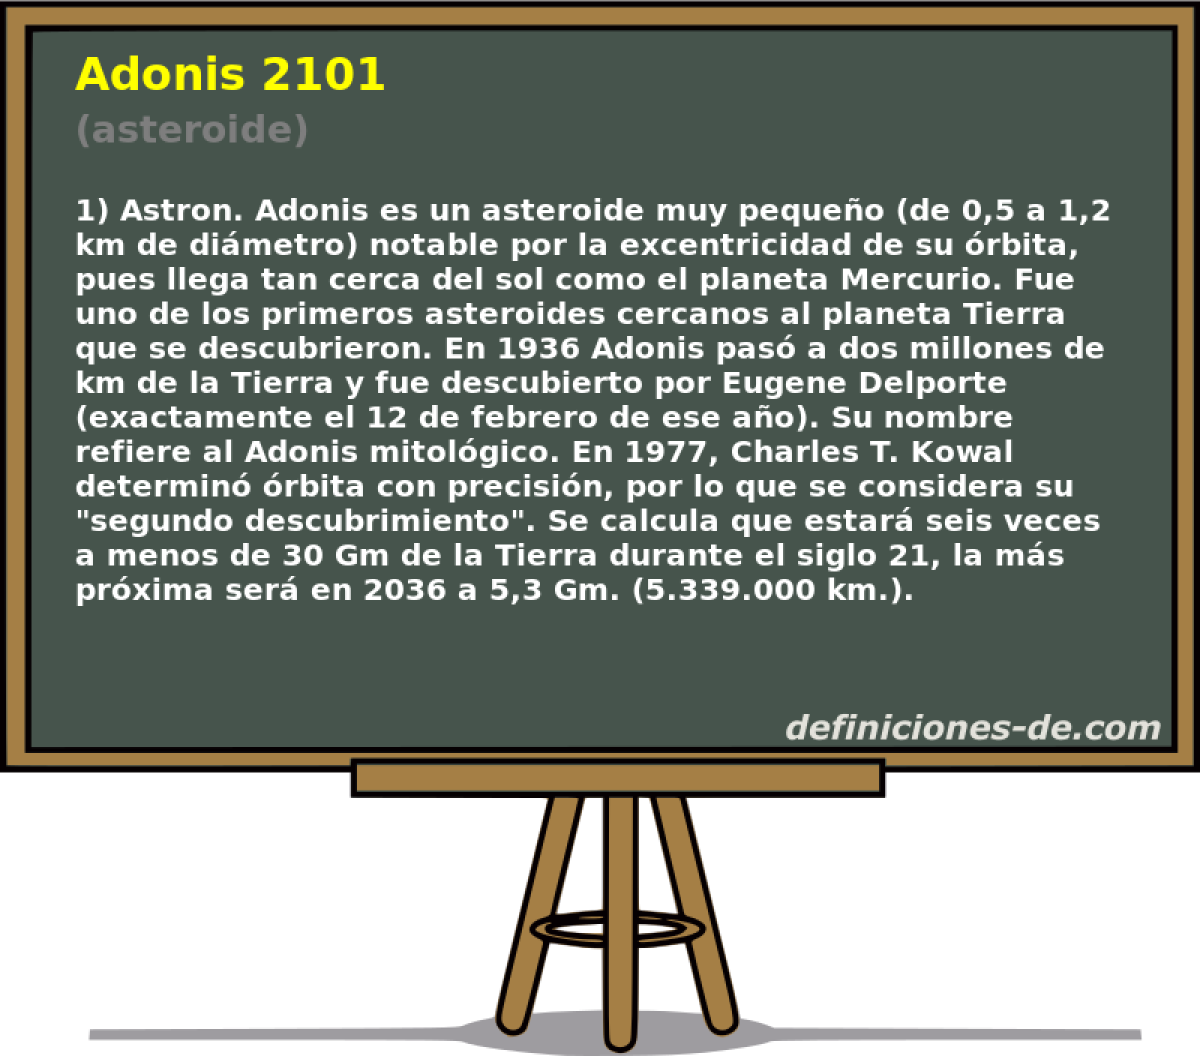 Adonis 2101 (asteroide)